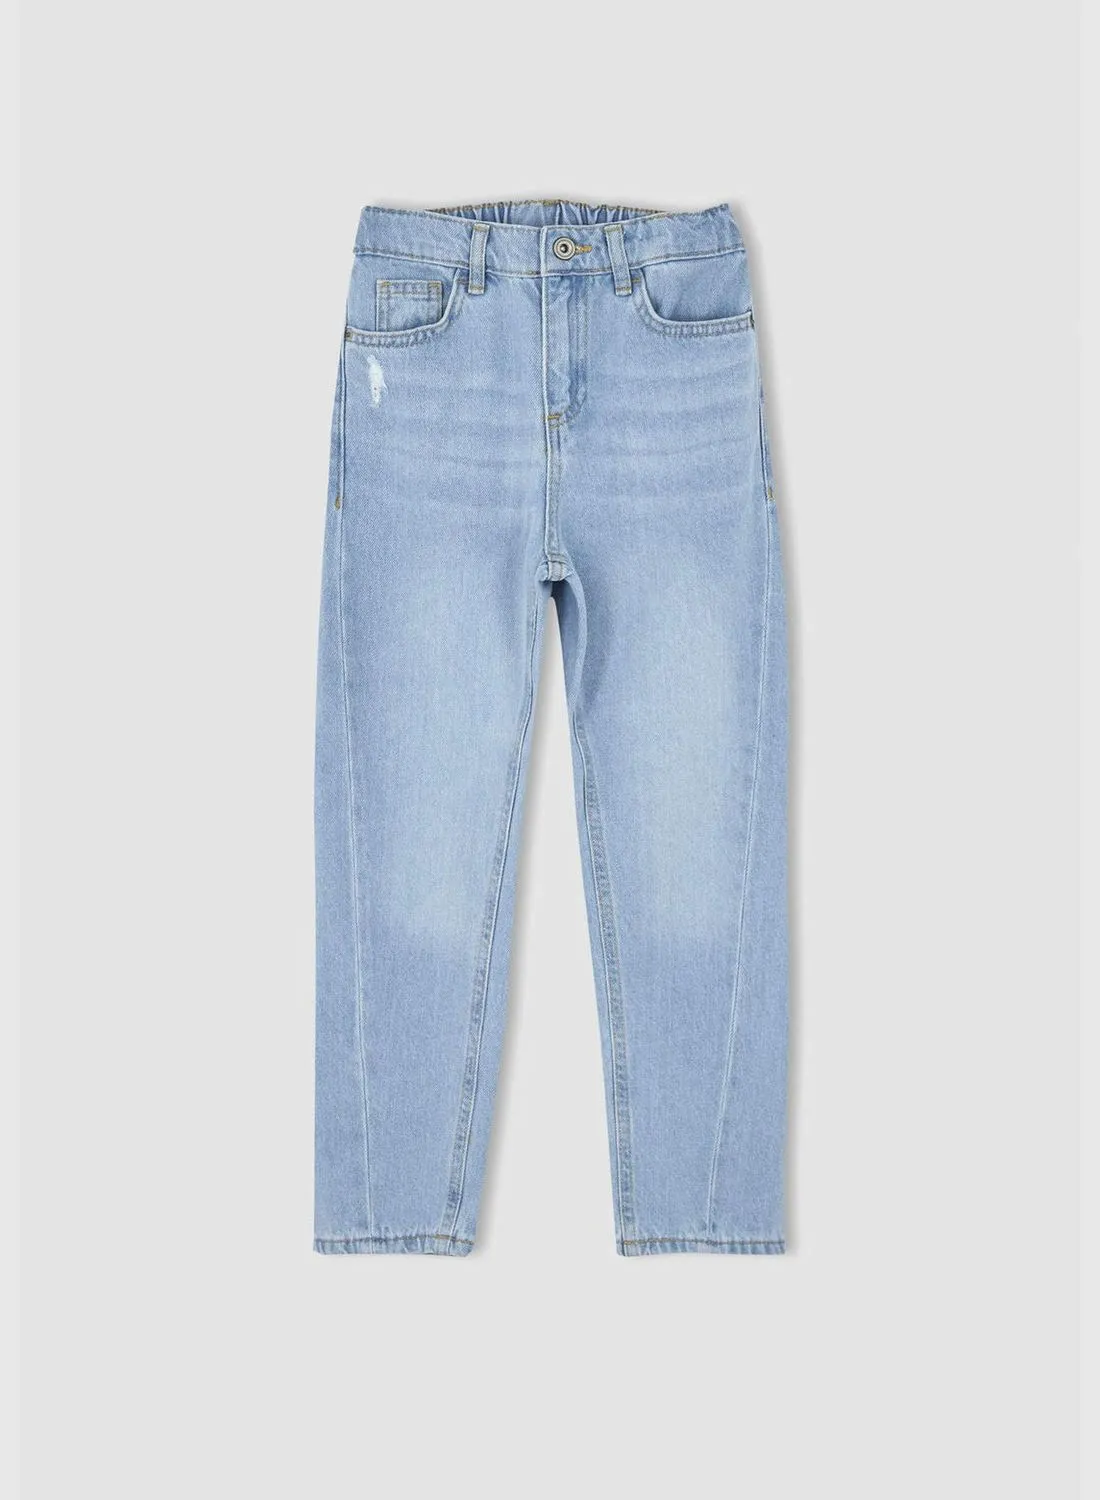 DeFacto Twisted Fit Straight Leg Jeans